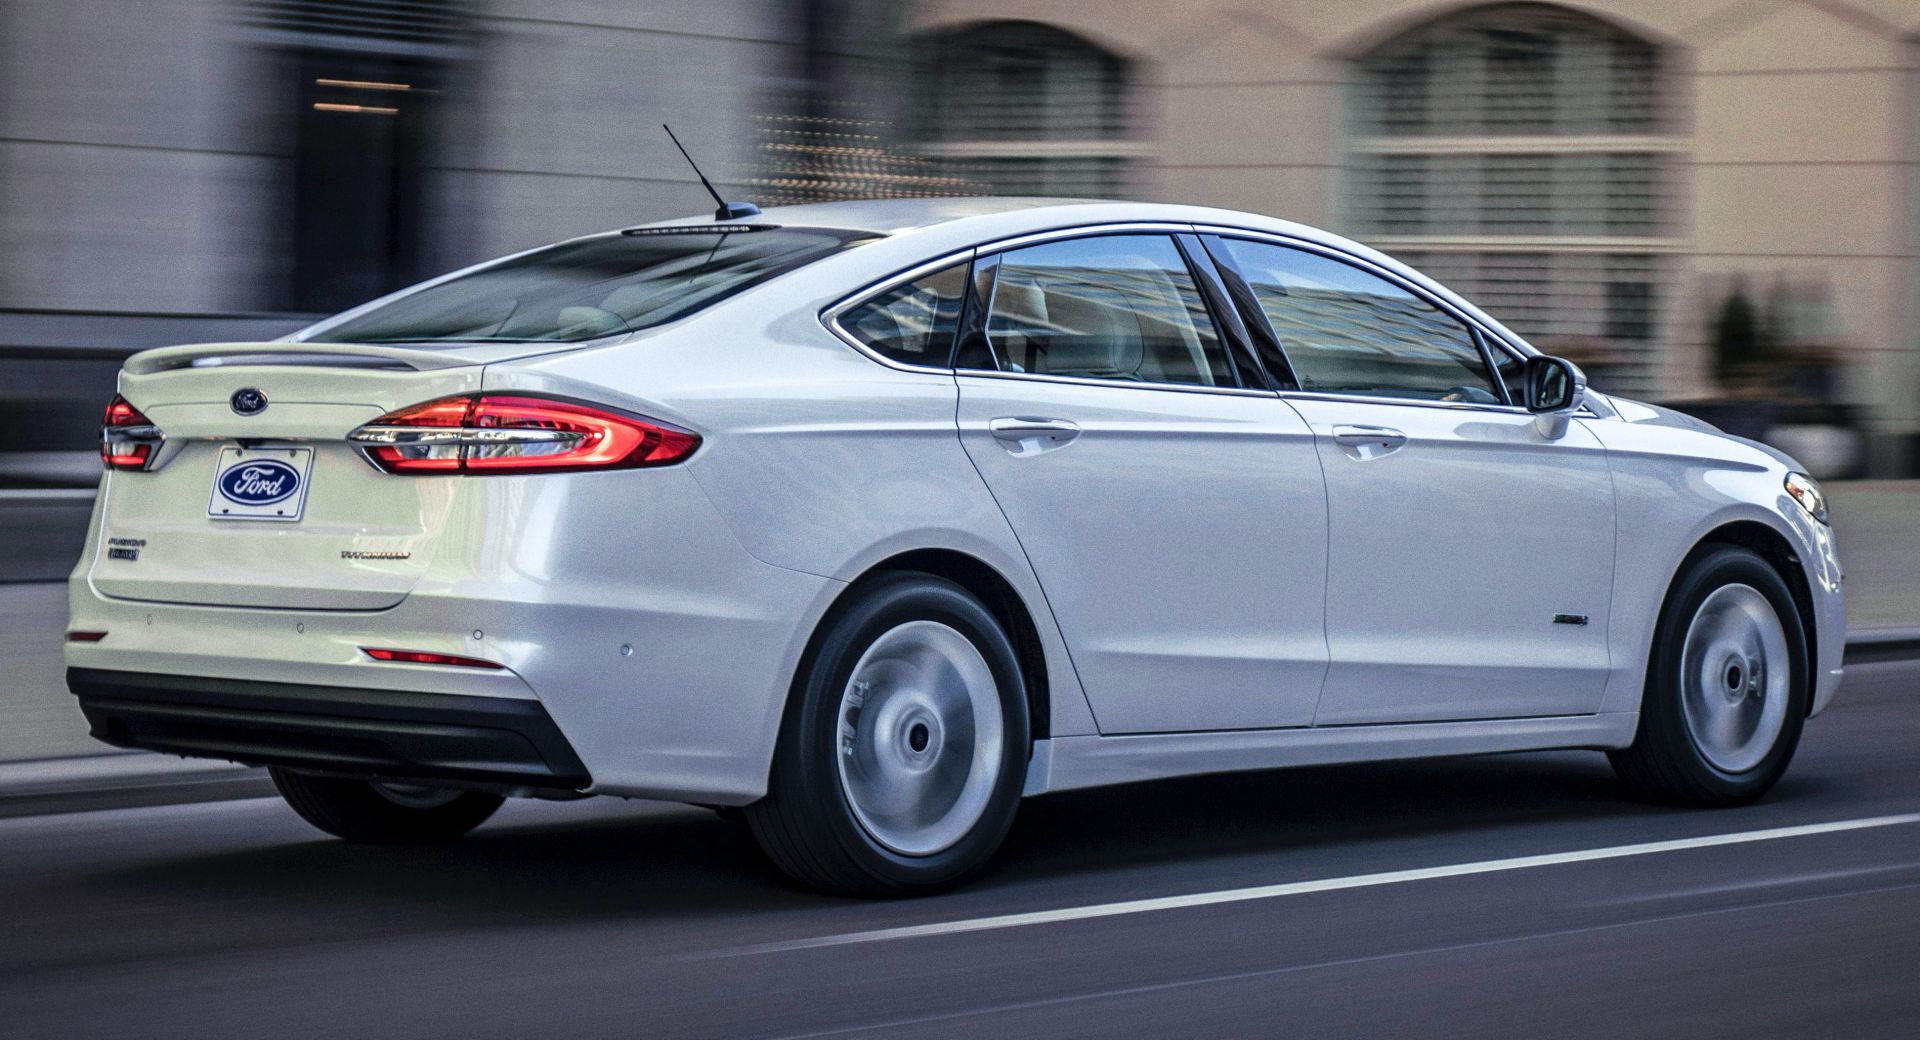 https://www.carscoops.com/wp-content/uploads/2020/08/2020-Ford-Fusion-0.jpg